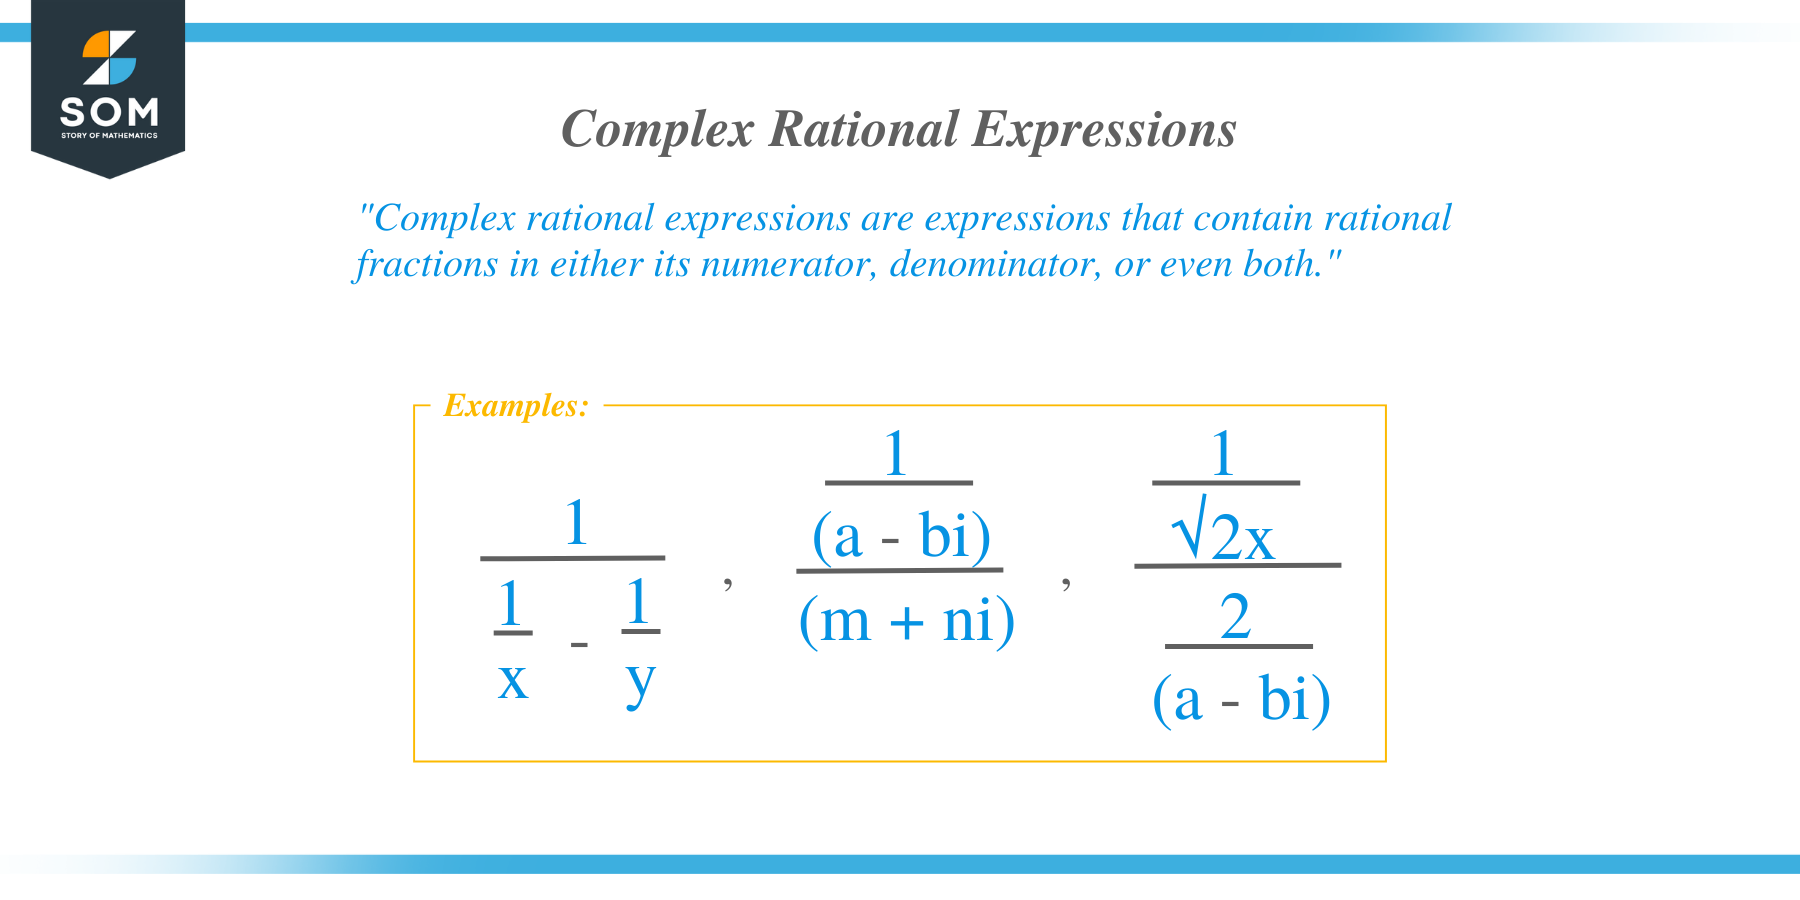 What is a complex rational expression?